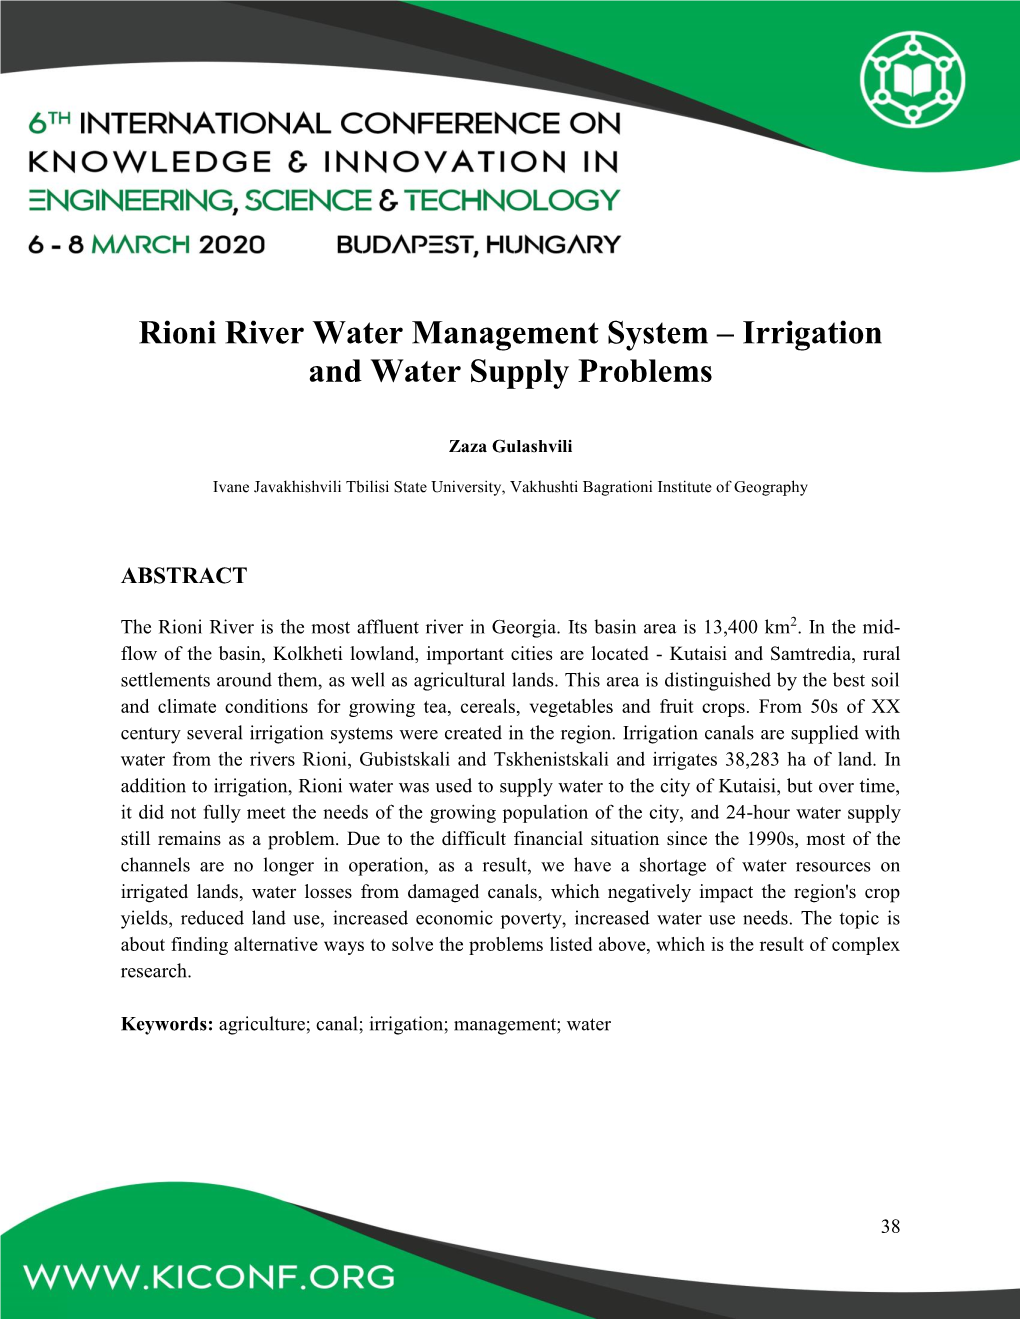 Rioni River Water Management System – Irrigation and Water Supply Problems